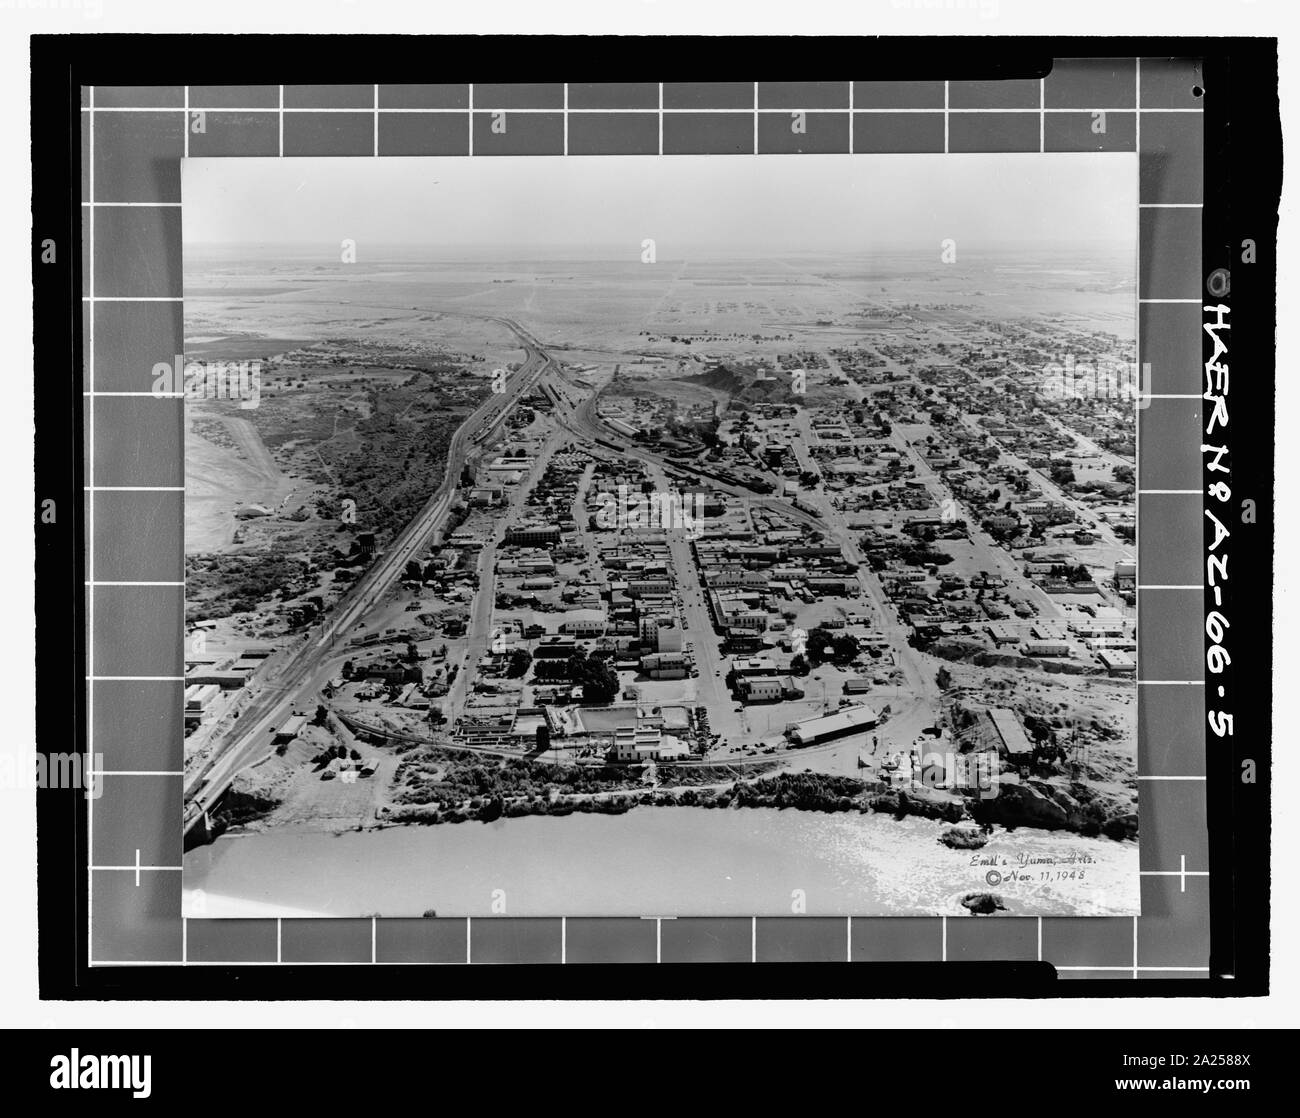 Photocopy of photograph (original print in collection of Gerald A. Doyle, Phoenix) Emil Eger, Photographer, November 11, 1948.  AERIAL VIEW LOOKING SOUTH OF THE YUMA CROSSING. THE SPRR WATER SETTLING RESERVOIR IS ON THE HILLOCK AT THE BOTTOM RIGHT CORNER OF THE IMAGE. THE LOCATION OF THE SPRR BRIDGES AT MADISON AVENUE IS MARKED BY THE TWO PIERS IN THE RIVER. THE CIRCULAR FOUNDATION OF THE SWING SPAN IS ON THE SHORELINE IMMEDIATELY BEYOND THE SECOND PIER. THE RESERVOIR ROOF IS INTACT. - Southern Pacific Railroad Water Settling Reservoir, Yuma Crossing, south bank of Colorado River at foot of Ma Stock Photo